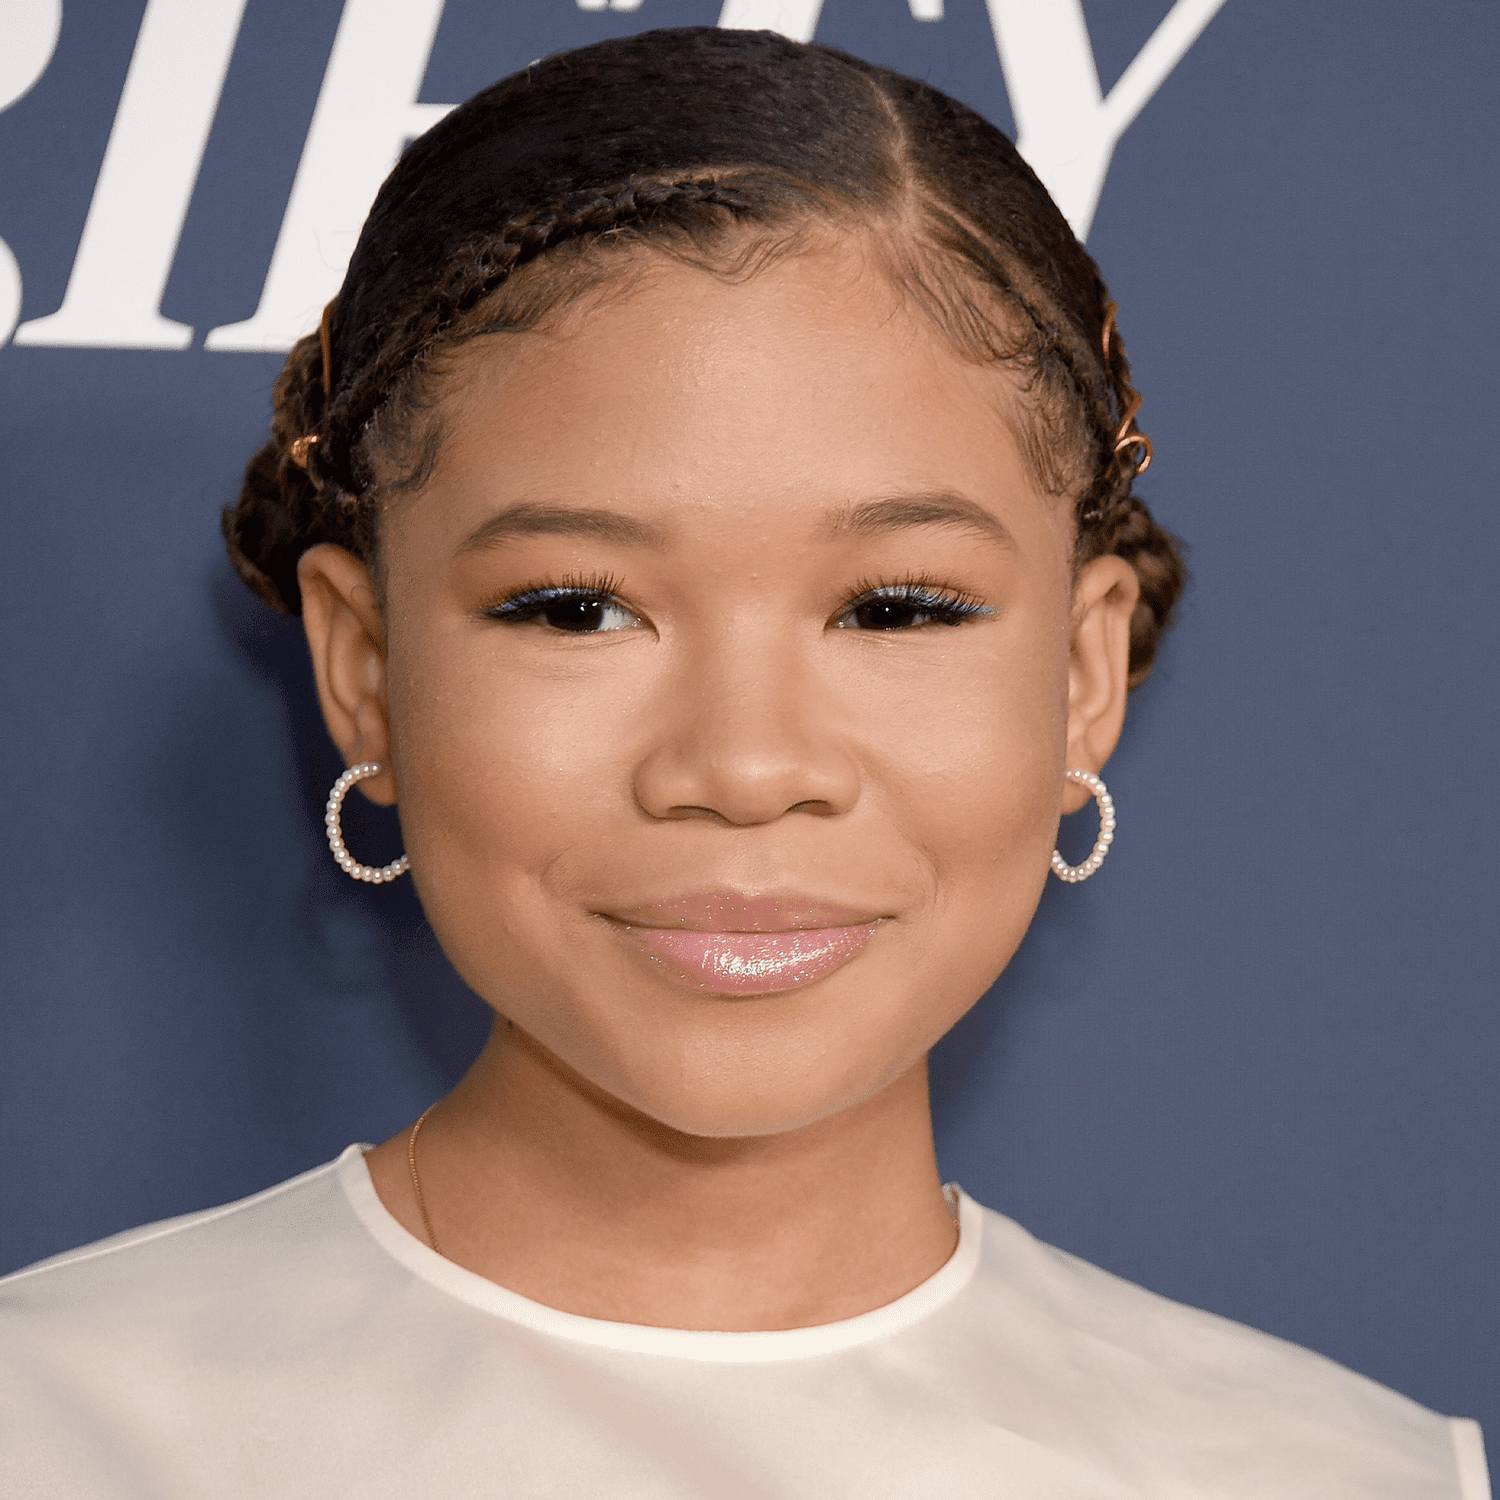 LOS ANGELES, CA - AUGUST 06: Storm Reid attends Variety's Power Of Young Hollywood at The H Club Los Angeles on August 6, 2019 in Los Angeles, California. (Photo by Gregg DeGuire/WireImage)